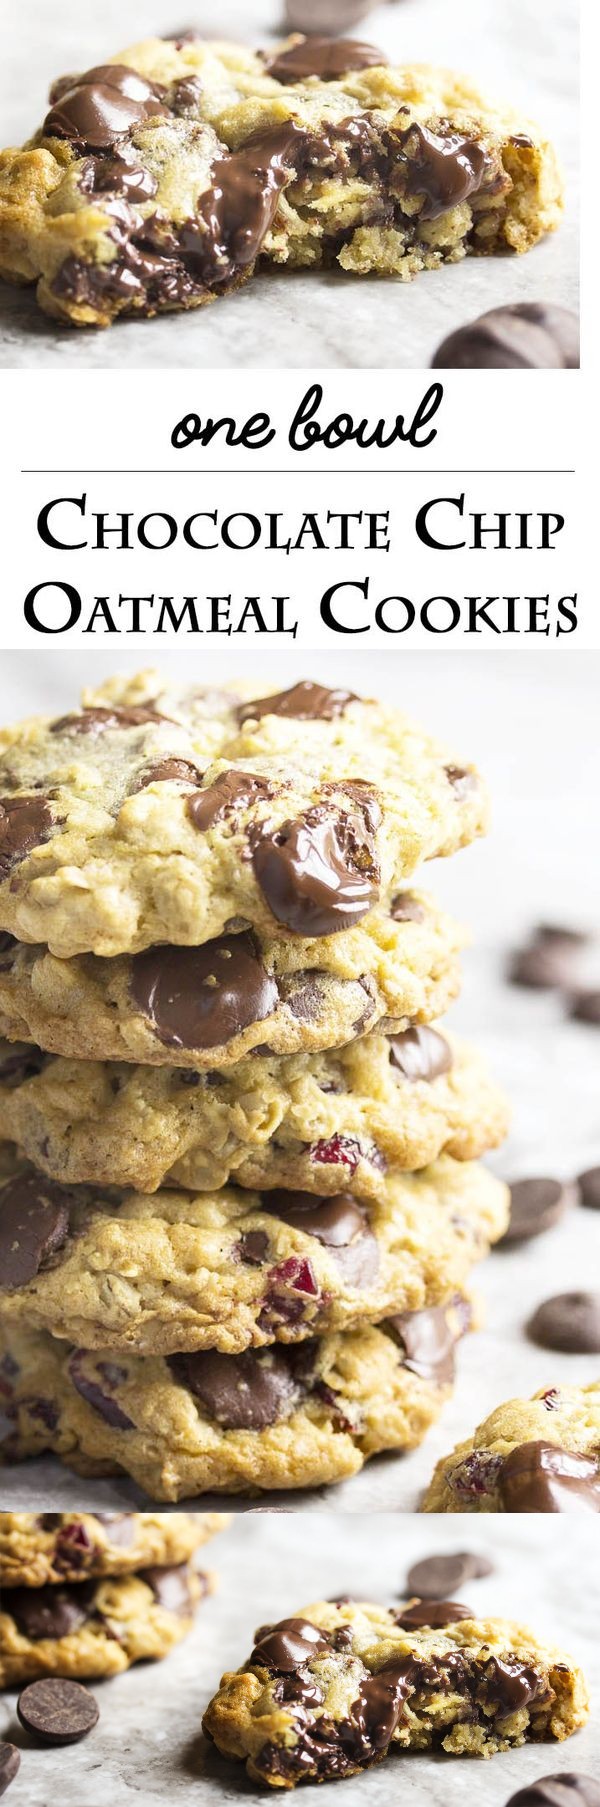 One Bowl Chocolate Chip Cherry Oatmeal Cookies